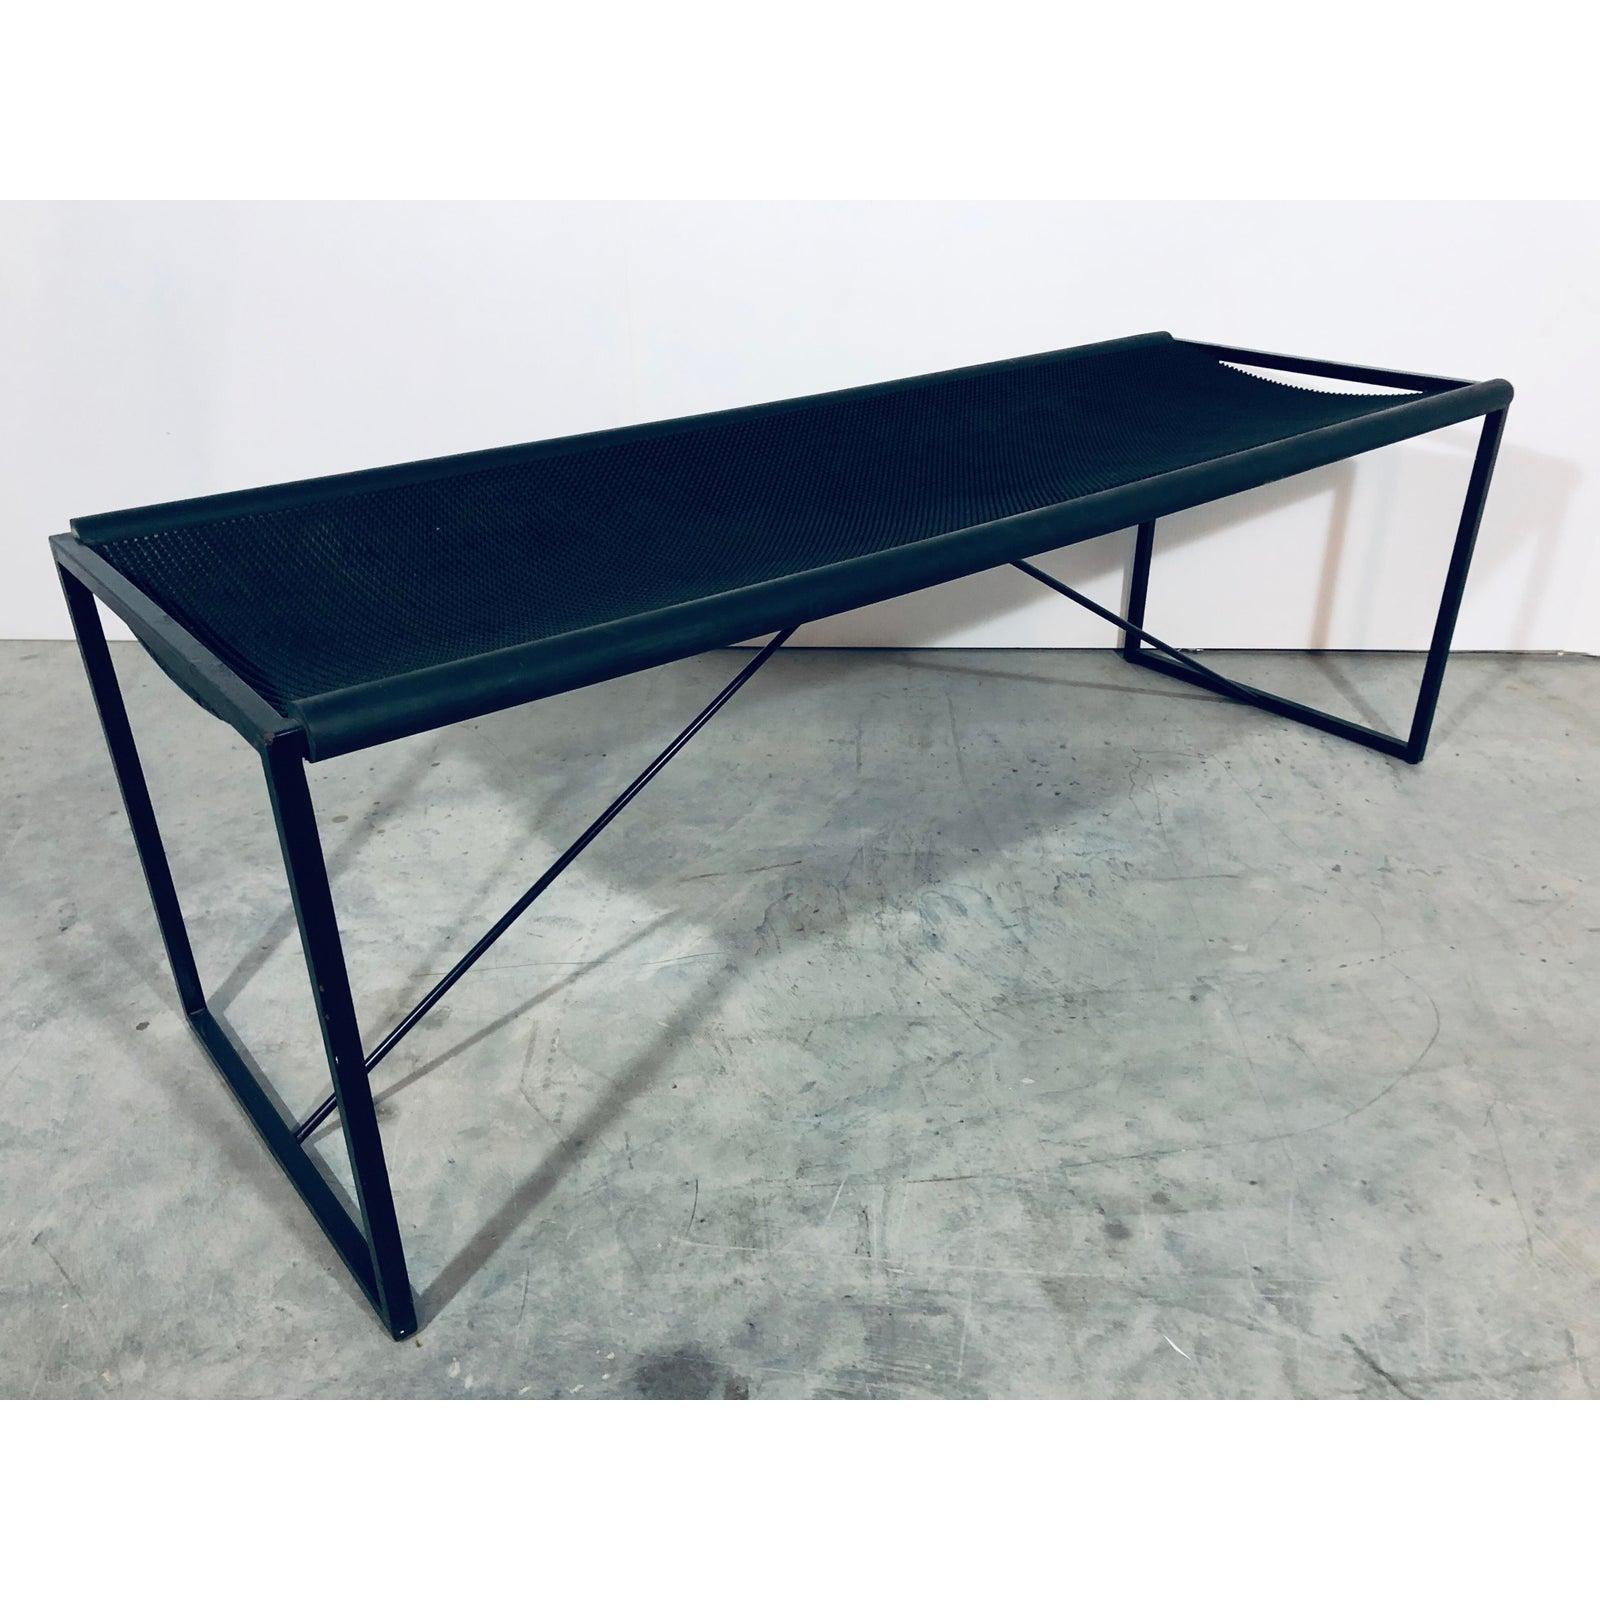 Maurizio Peregalli Modernist Bench for Zues, Italy, 1980s In Good Condition For Sale In Miami, FL